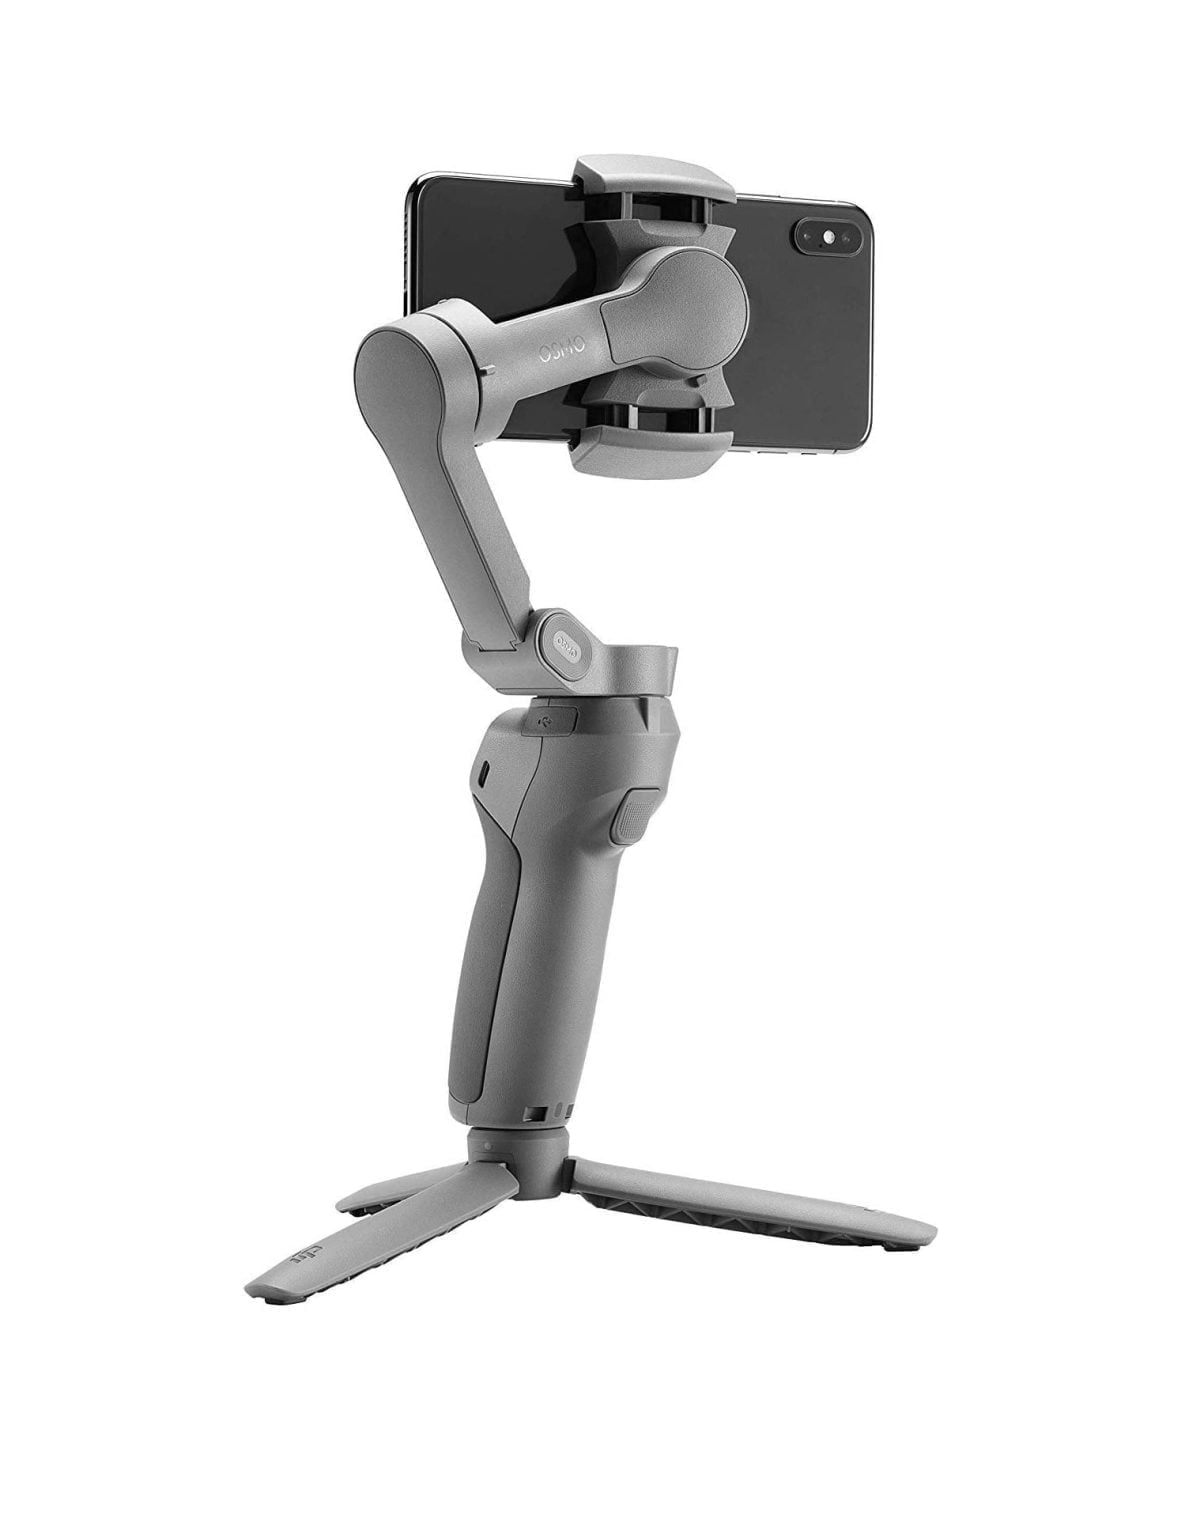 61Ecirjdqll. Ac Sl1500 Dji &Lt;A Href=&Quot;Https://Www.dji.com/Ae/Osmo-Mobile-3?From=Store-Product-Page&Quot;&Gt;Osmo Mobile 3 Official Product Page&Lt;/A&Gt; &Lt;H1 Class=&Quot;Product-Name Logo&Quot;&Gt; Osmo Mobile 3 Combo&Lt;/H1&Gt; &Lt;Div Class=&Quot;Product-Cover&Quot;&Gt; &Lt;Img Class=&Quot;Alignnone Size-Medium Wp-Image-5354&Quot; Src=&Quot;Https://Lablaab.com/Wp-Content/Uploads/2019/11/Annotation-2019-11-05-113239-300X92.Jpg&Quot; Alt=&Quot;&Quot; Width=&Quot;300&Quot; Height=&Quot;92&Quot; /&Gt; 1. Slow Motion Is Currently Only Supported By Ios Devices. 2. You Can Also Transition Between Portrait And Landscape Mode By Rotating The Roll Axis Manually. 3. Activate This Function In Settings. By Default, If You Press The M Button Once, You Can Quickly Switch Between Taking A Photo And Recording A Video. &Lt;/Div&Gt; Dji Osmo Mobile 3 Combo Dji Osmo Mobile 3 Combo